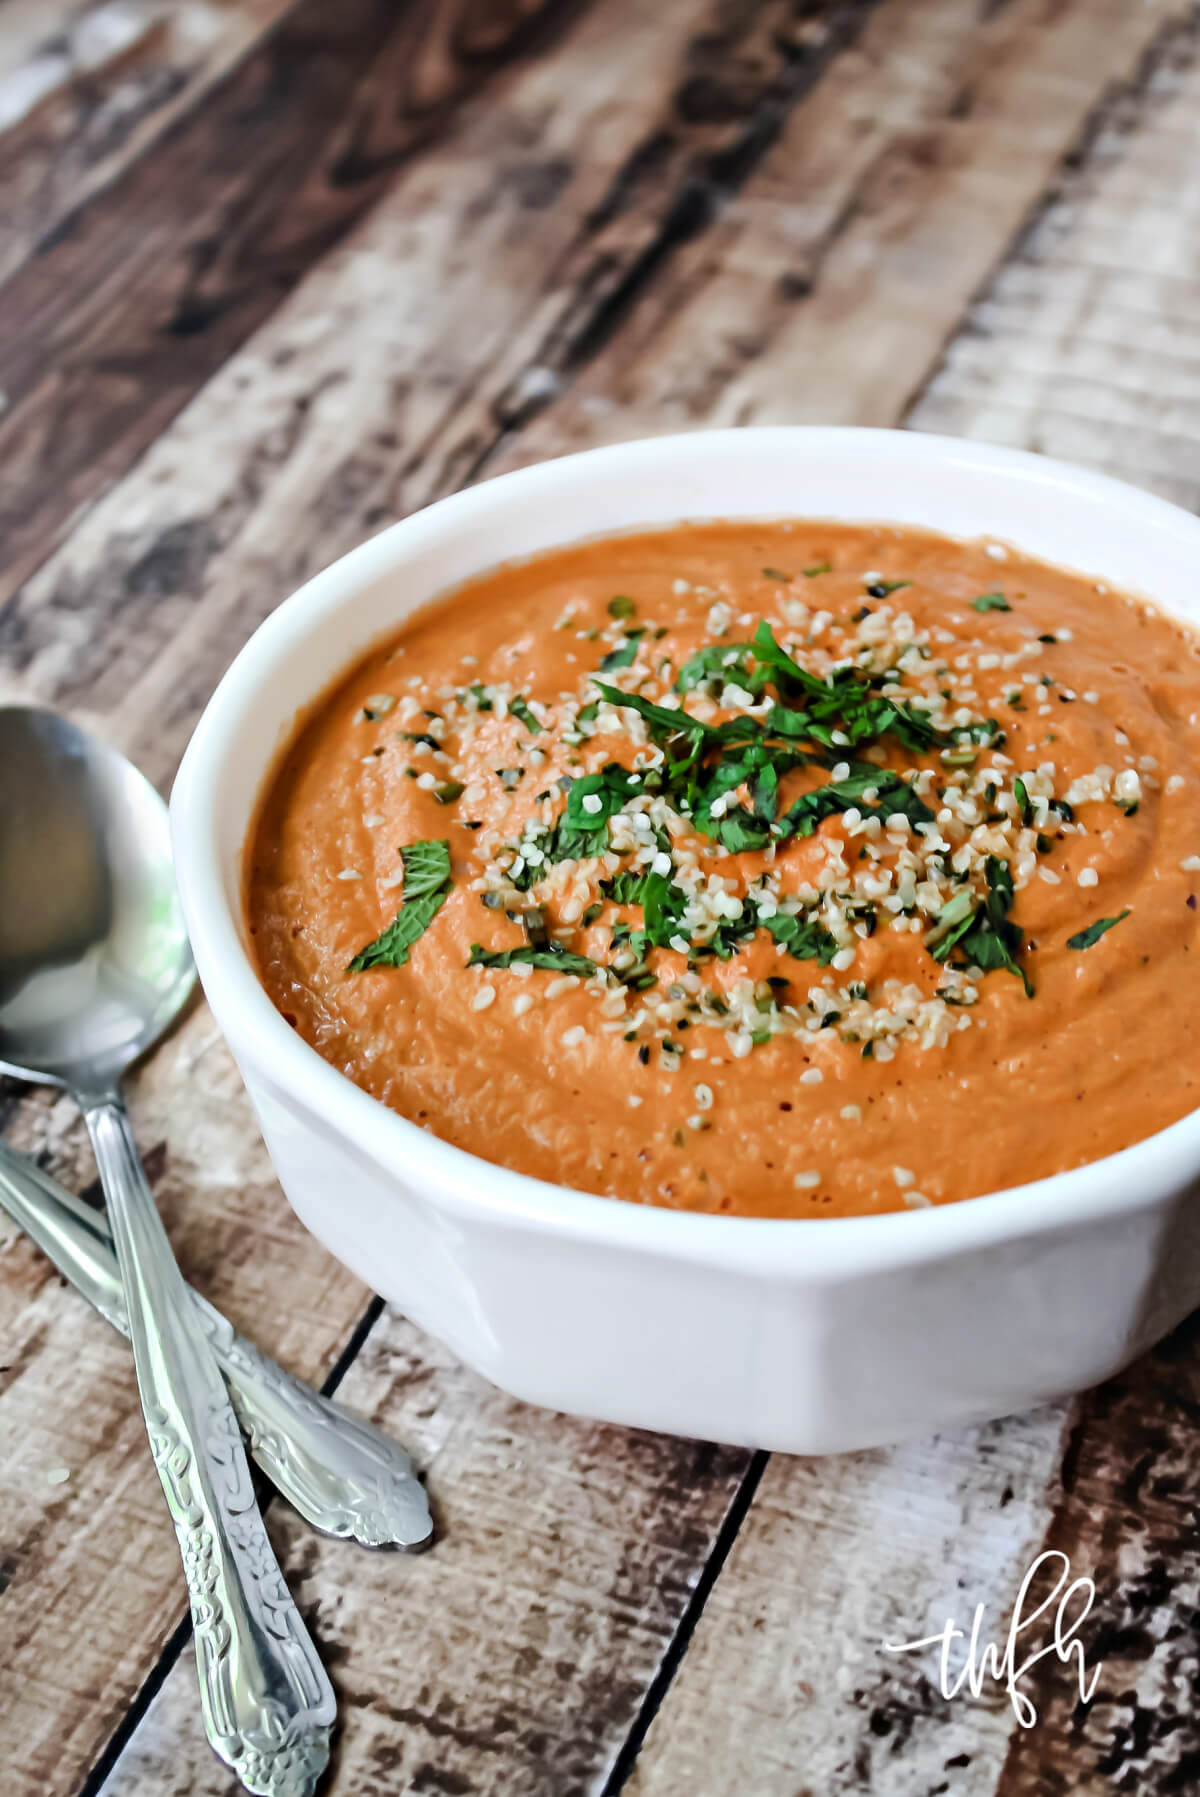 Vertical image of a white bowl filled with creamy tomato basil soup on top of a weathered wooden surface